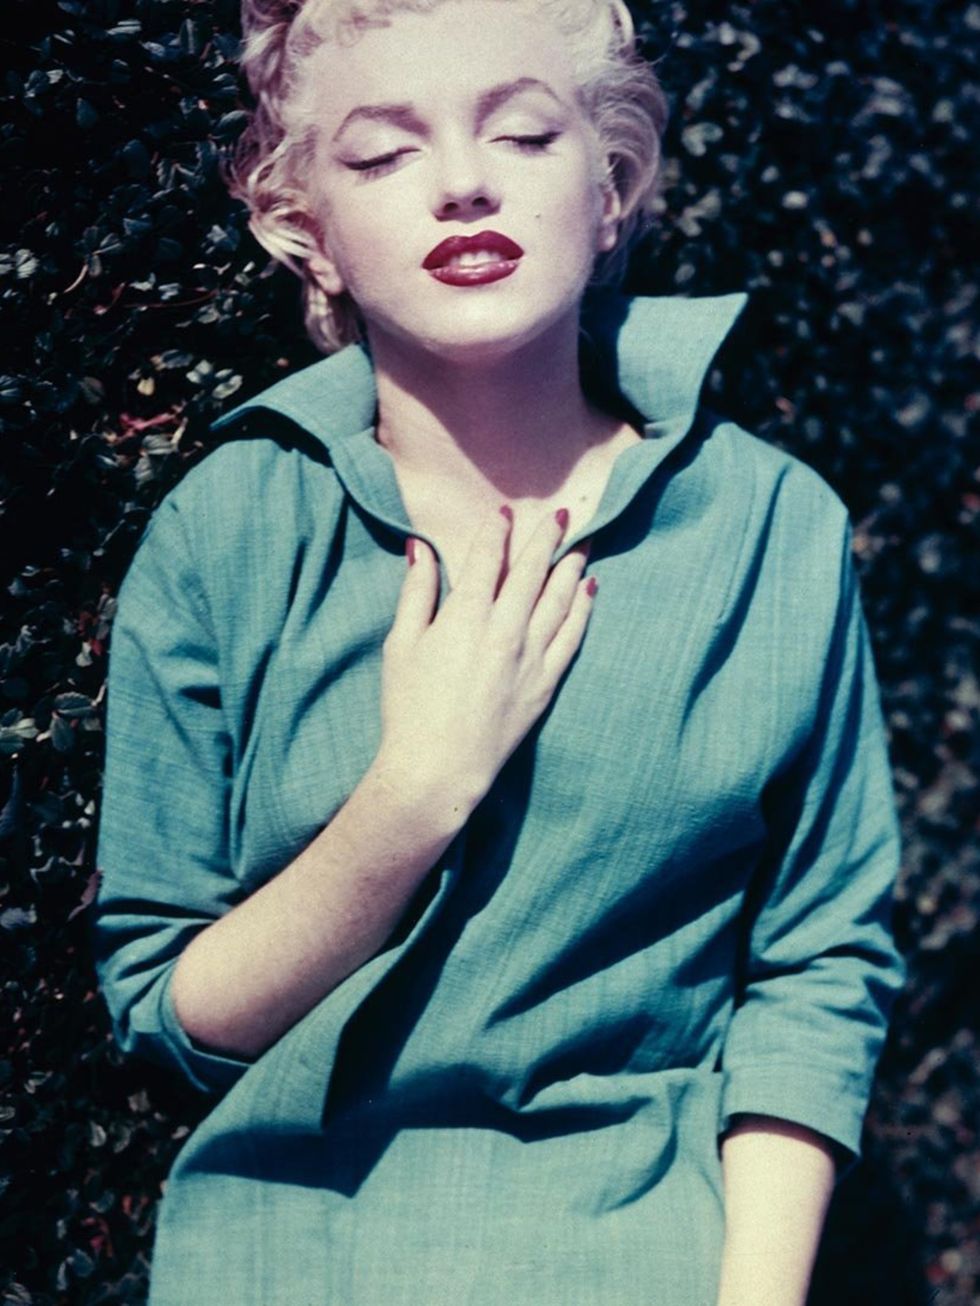 <p><strong>Marilyn Monroe, 1954</strong></p><p>Denim + red lipstick = the dream combination</p>